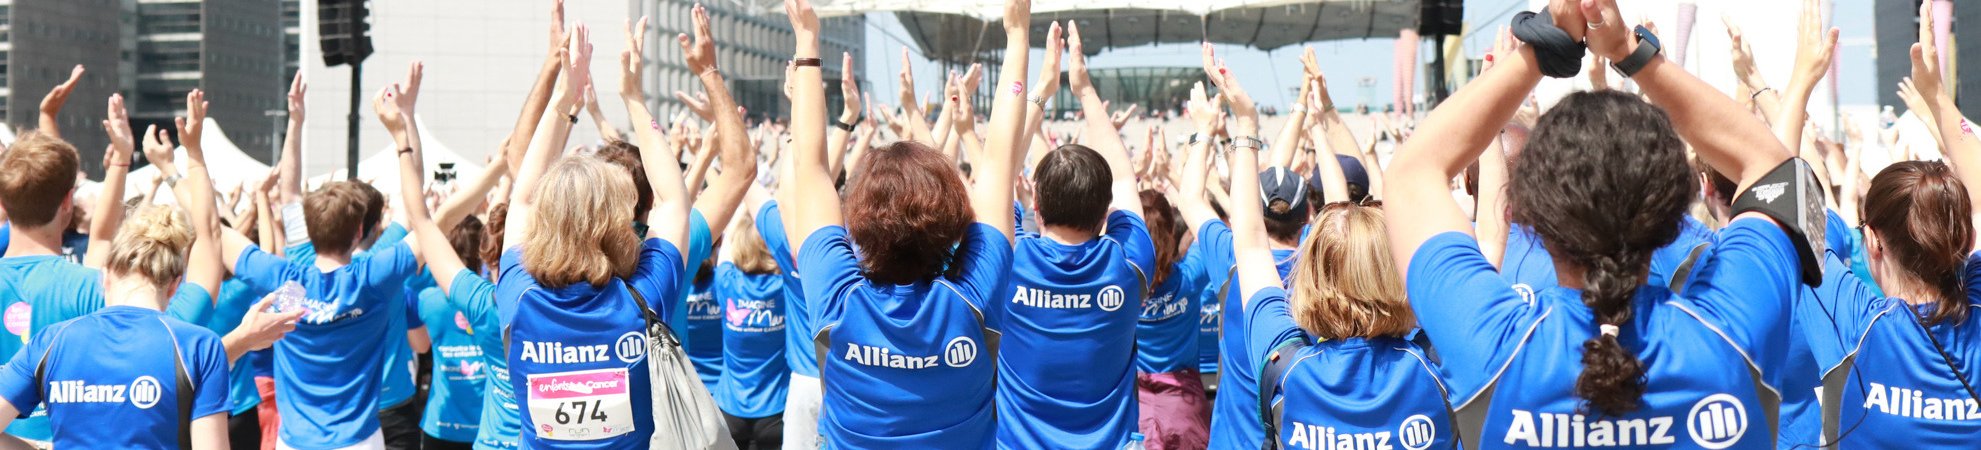 Datacenter and cloud service Local manager - Allianz France